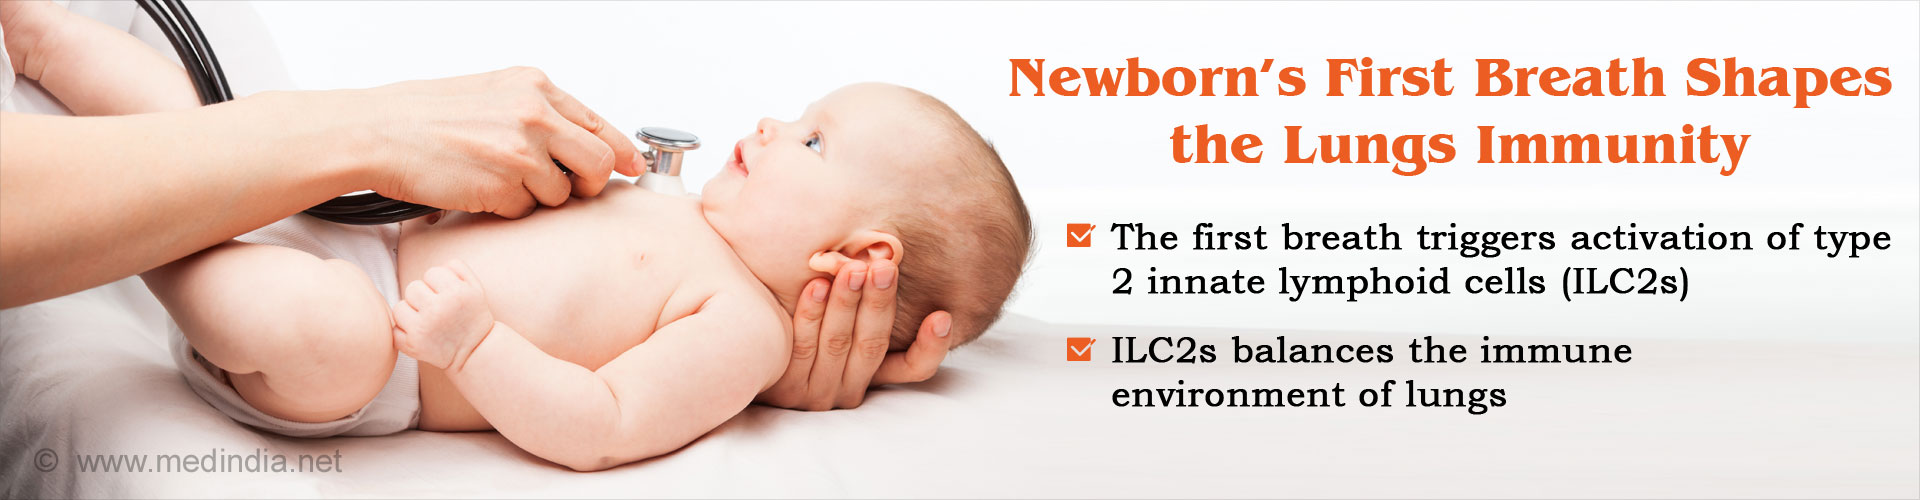 Newborn's first breath shapes the lungs immunity
- The first breath triggers activation of type 2 innate lymphoid cells (ILC2s)
- ILC2s balances the immune environment of lungs